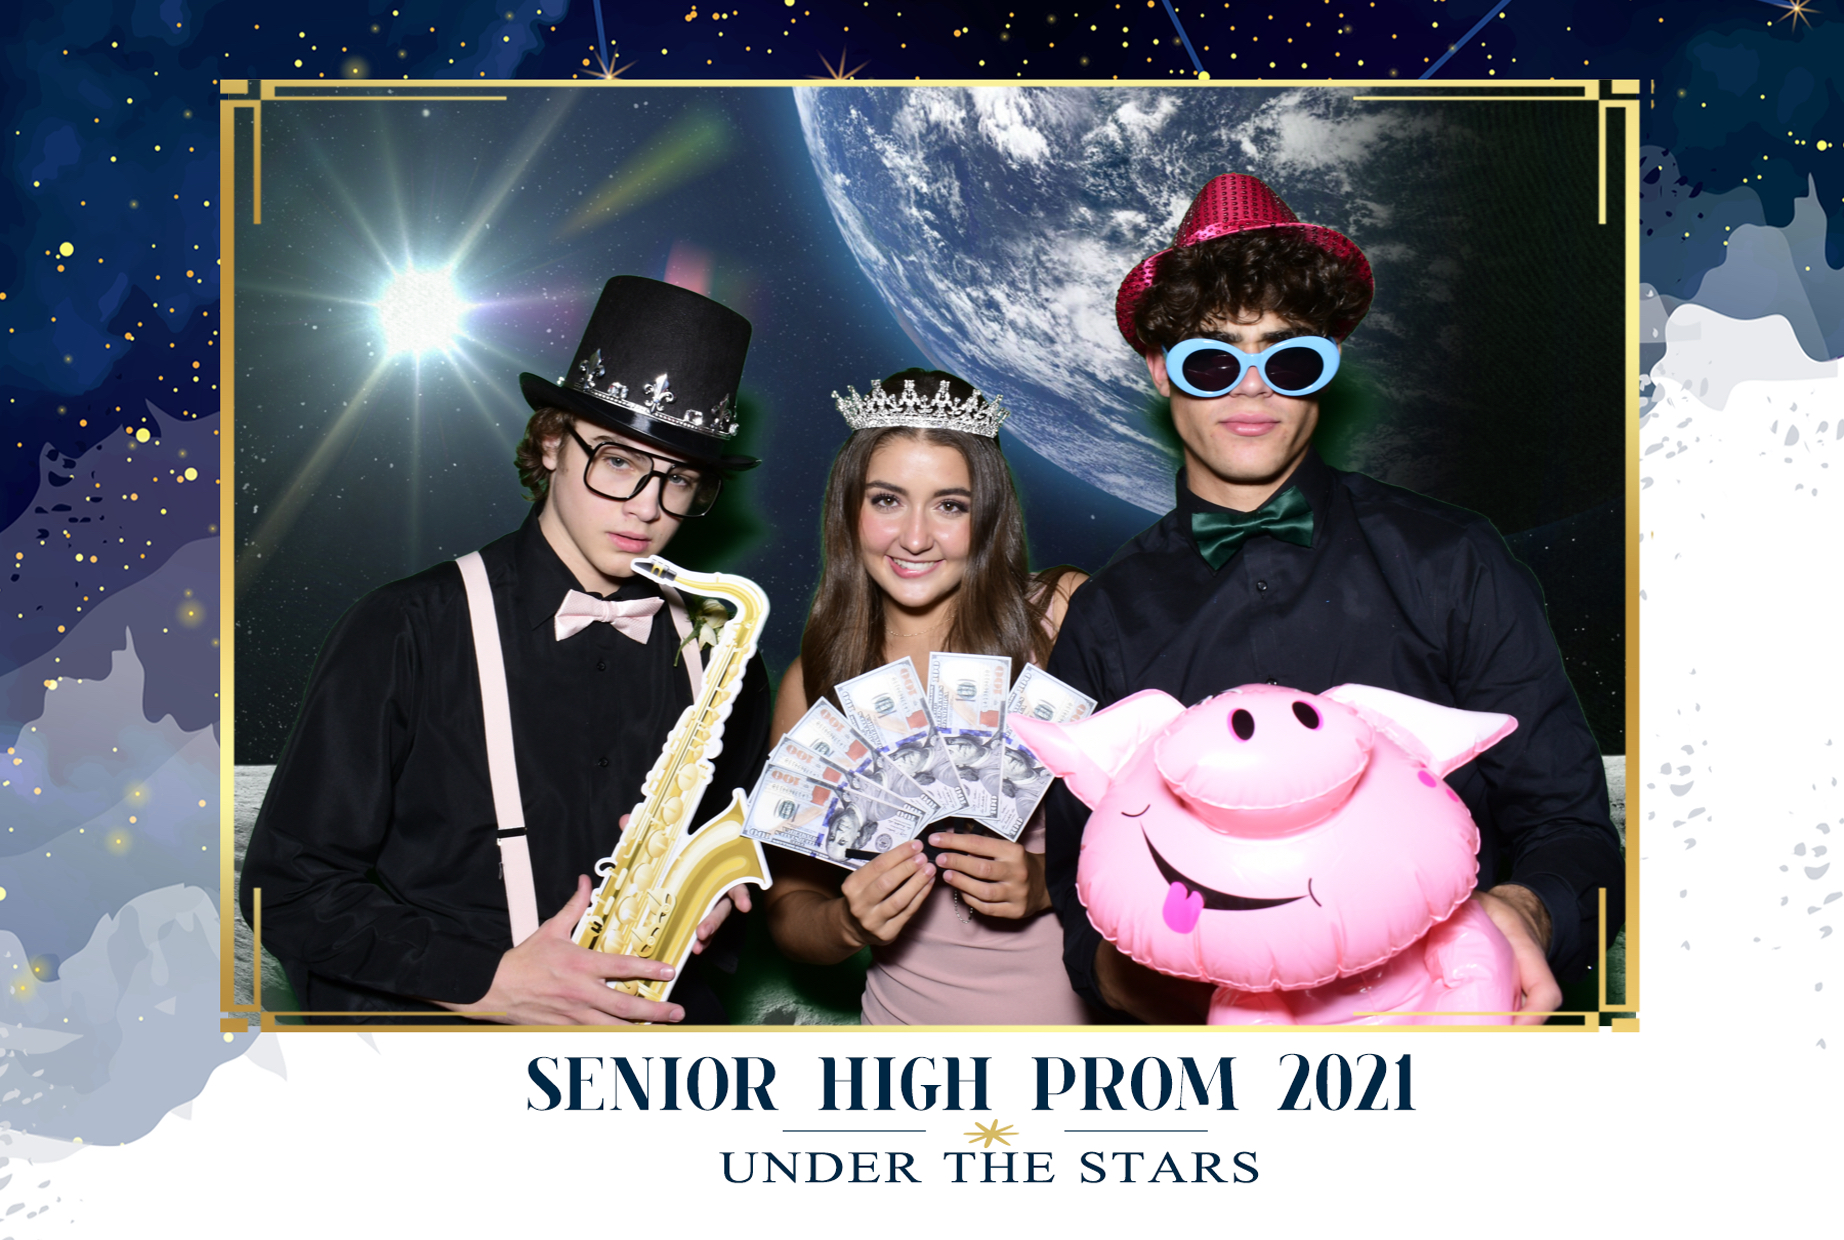 Sample photo from prom event